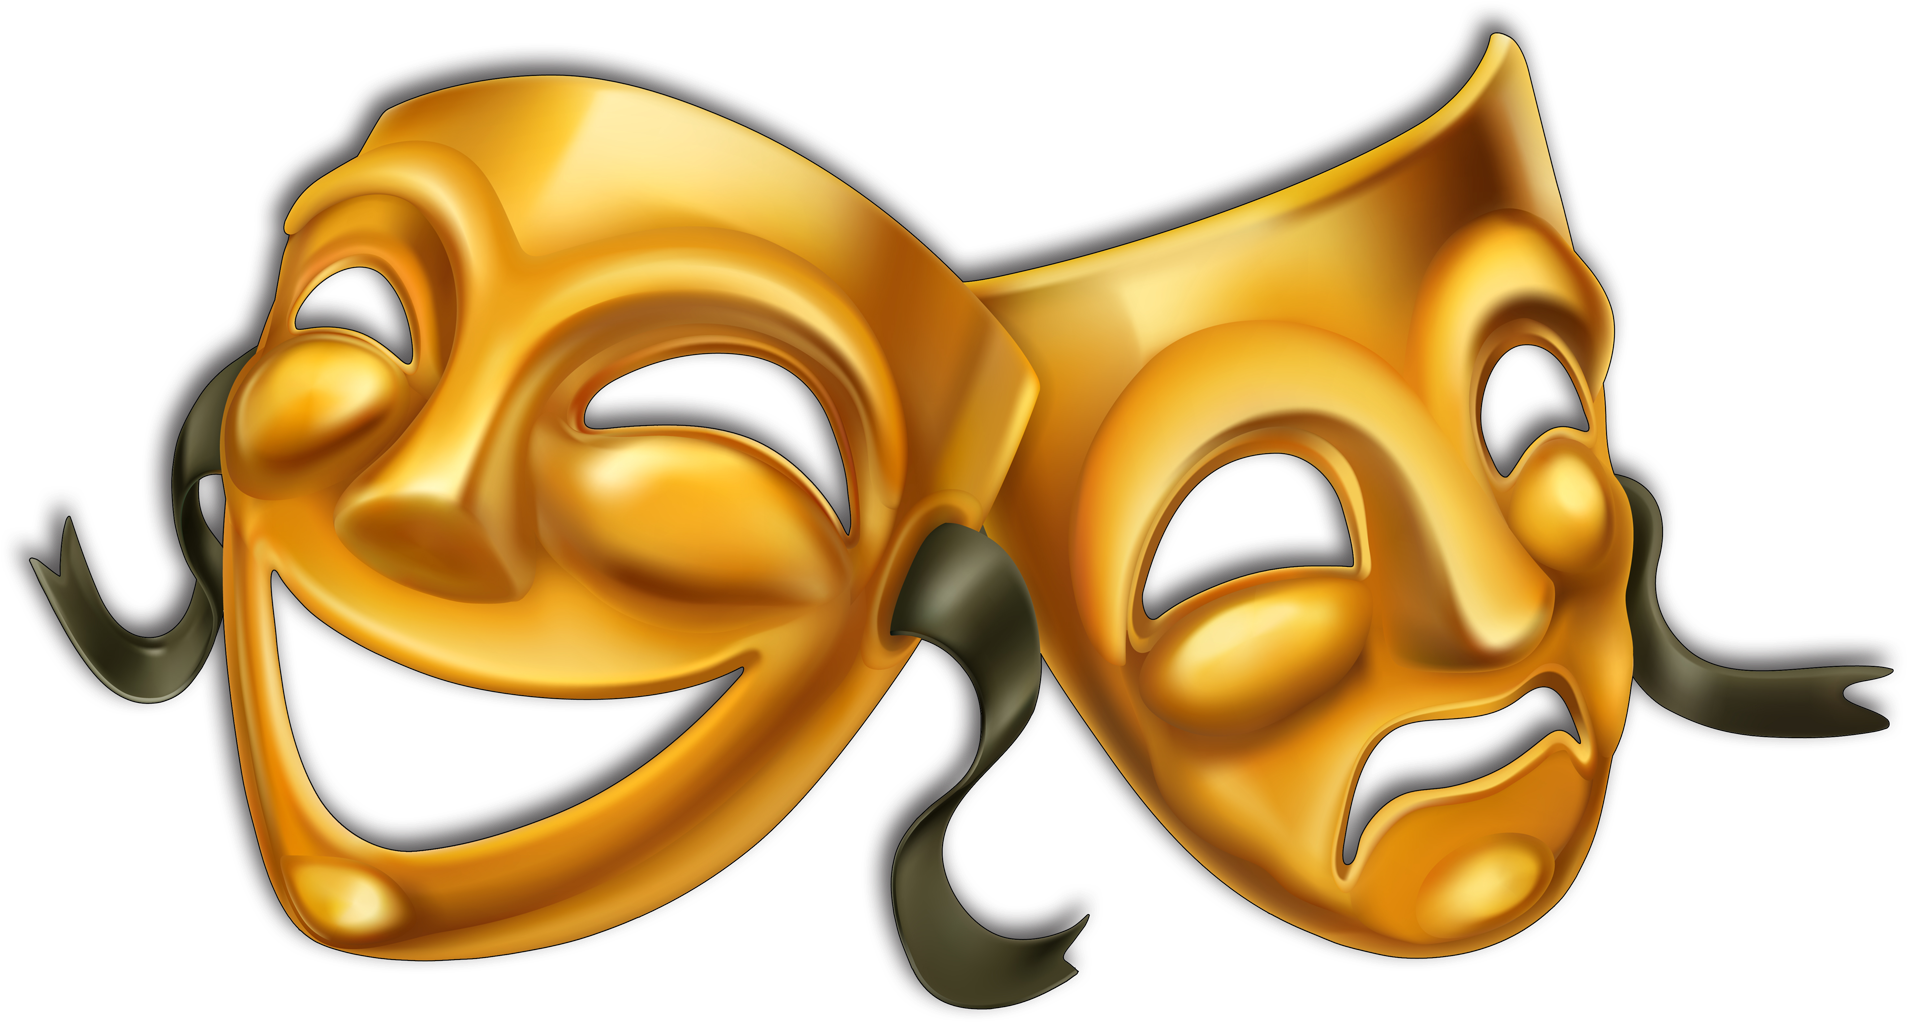 A Gold Masks With A Black Background